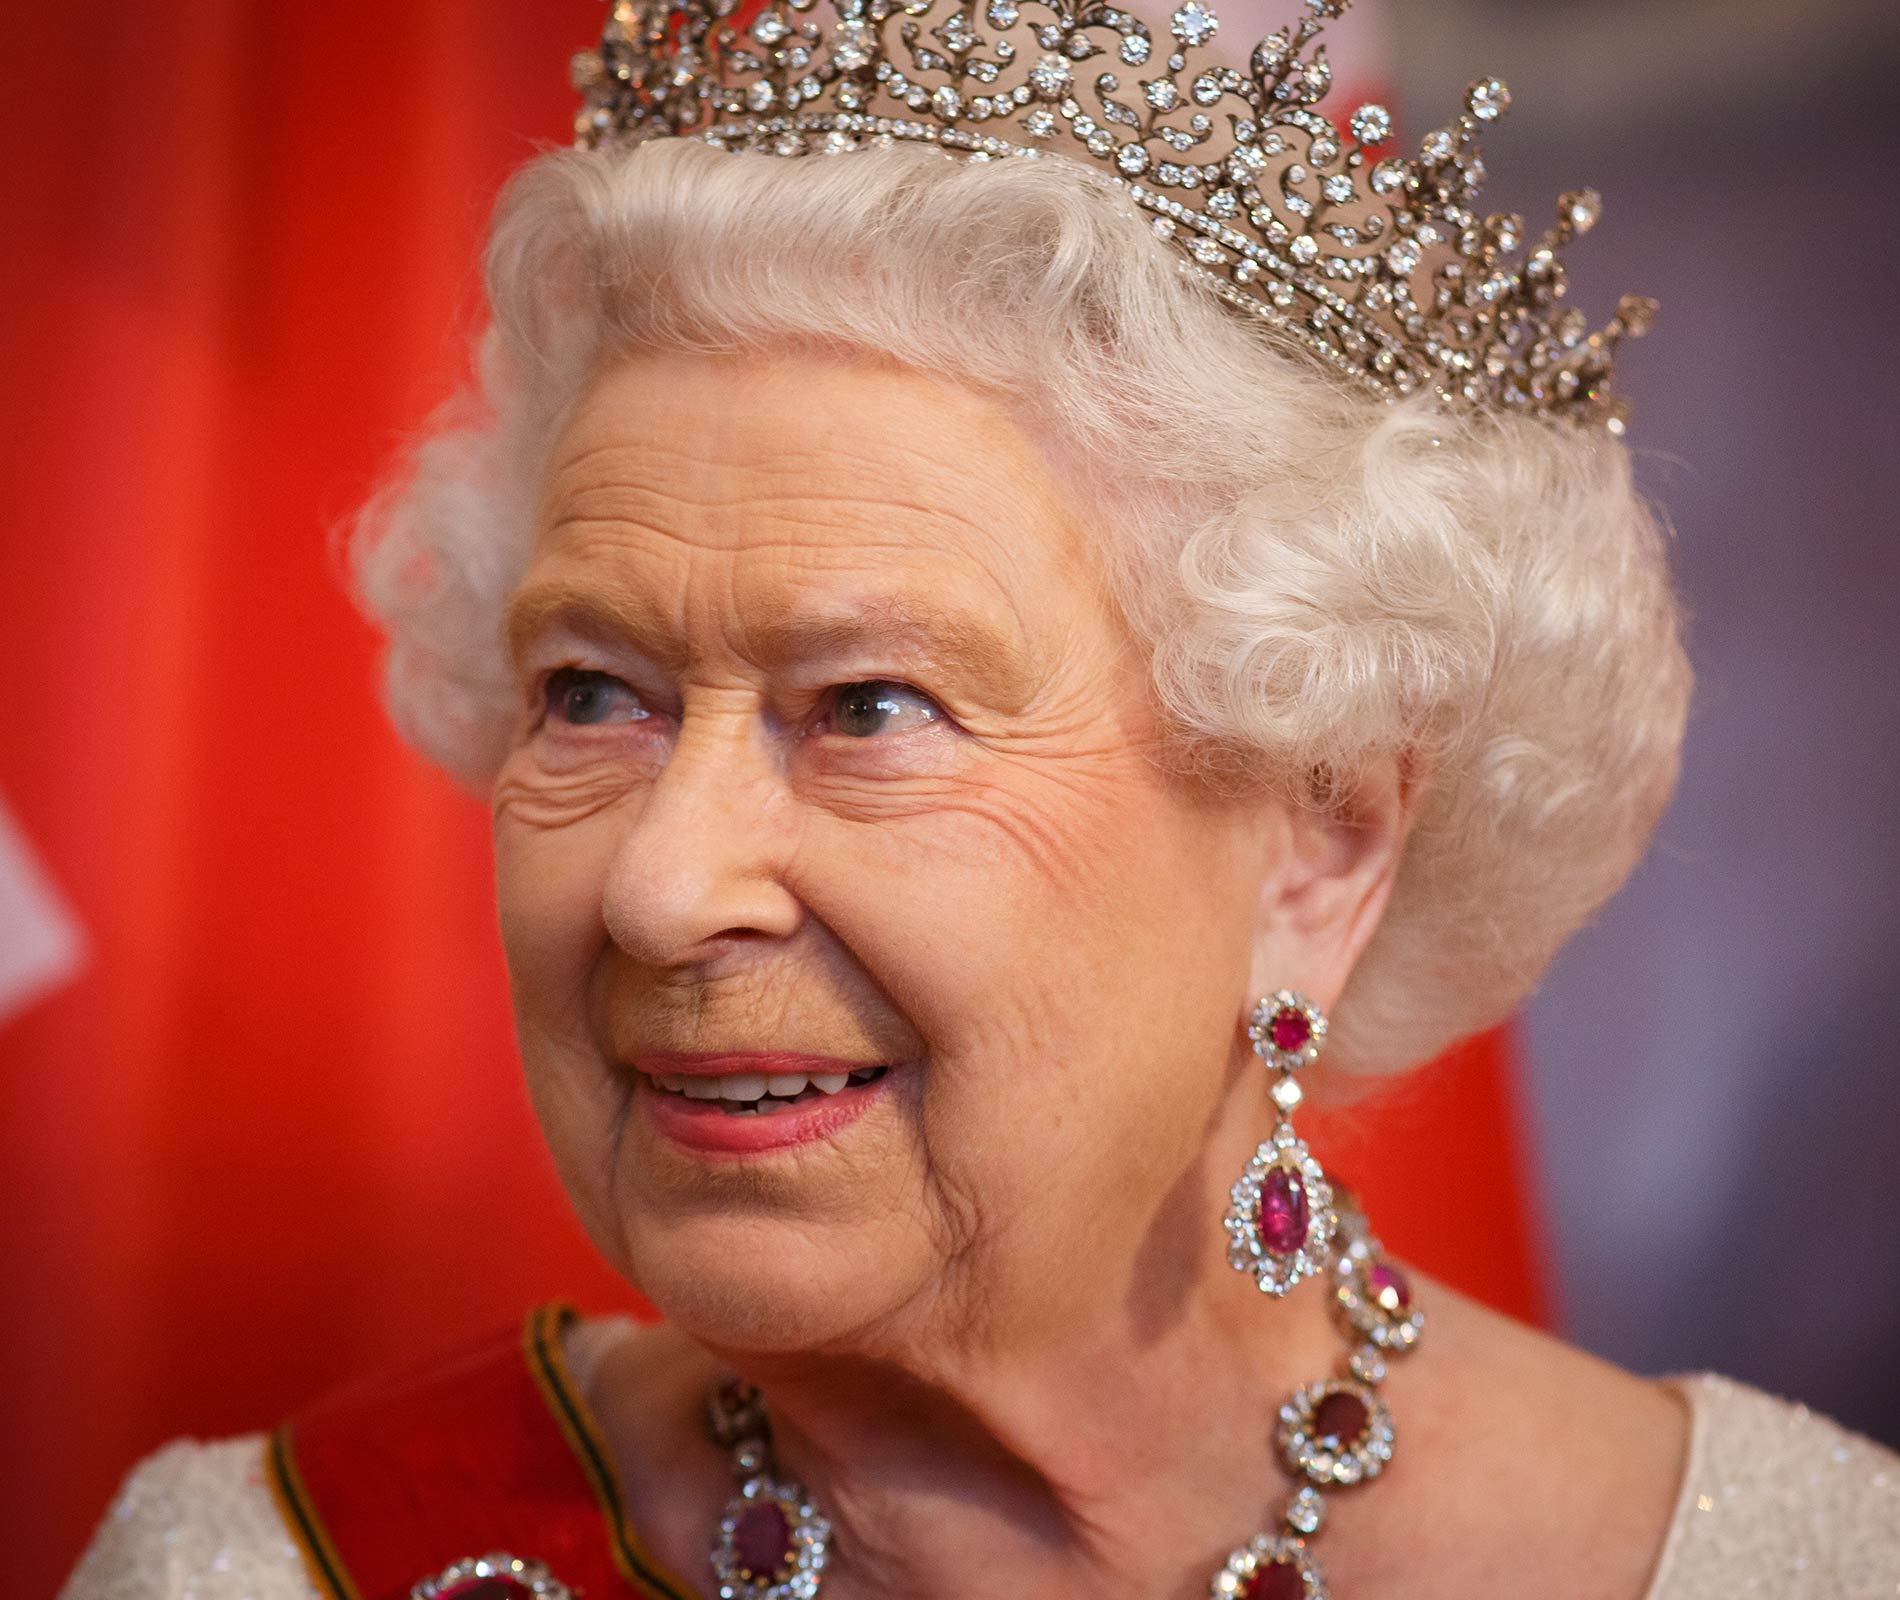 The Queen to lighten her official load ahead of the New Year